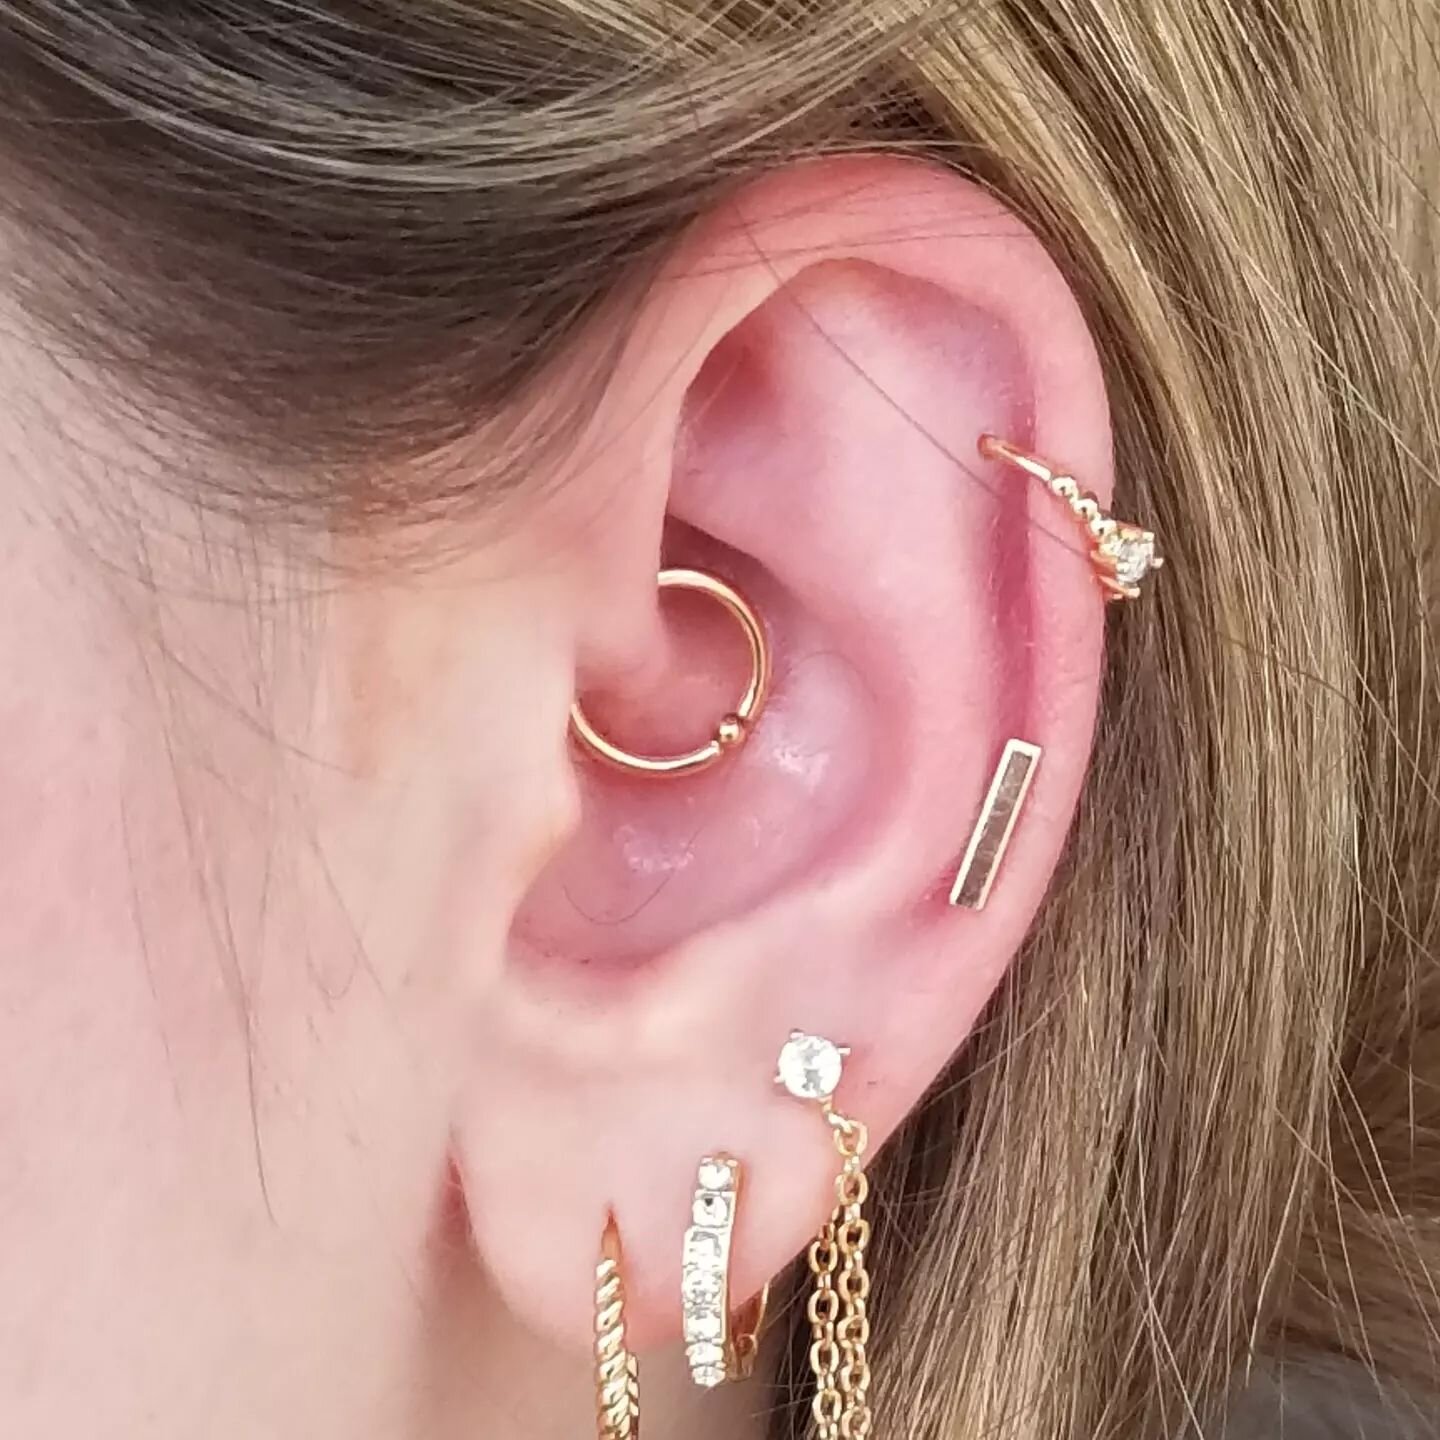 Robert @piercingsbyrobert added this daith piercing today using a 14kt gold fixed bead ring.

#daithpiercing #daith #goldbodyjewelry #goldjewelry #bodyjewelry #bodypiercing #legitbodyjewelry #safepiercing #piercings #piercing #piercingsofinstagram&nb